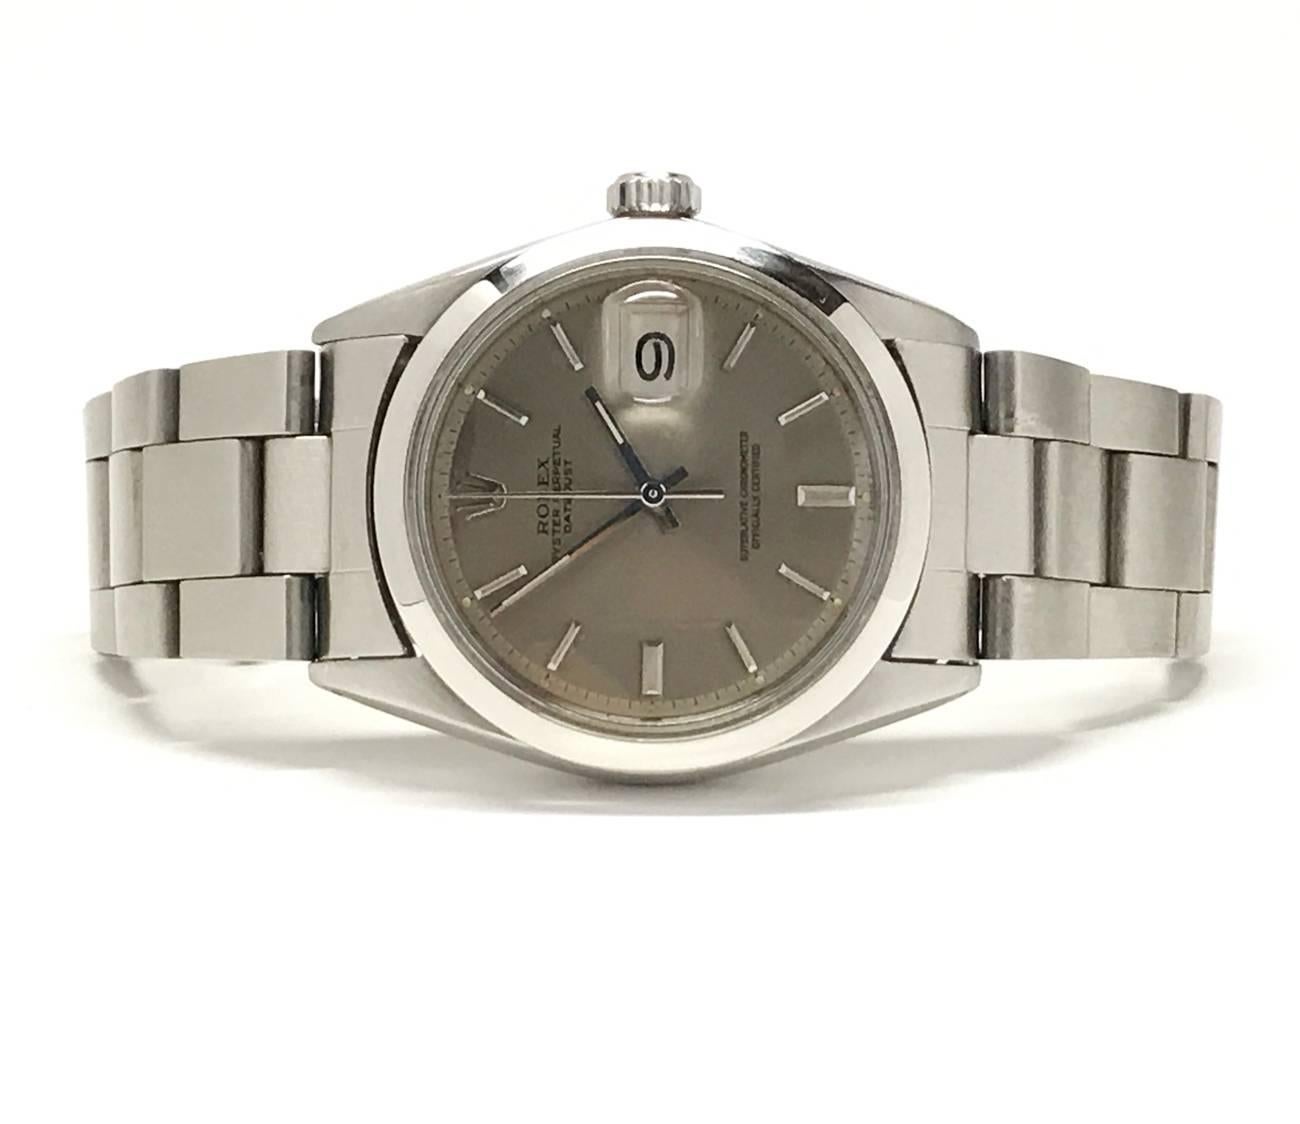 Mid-Century Modern Vintage Men's Rolex Datejust Oyster Wristwatch Stainless Steel and Gray Dial